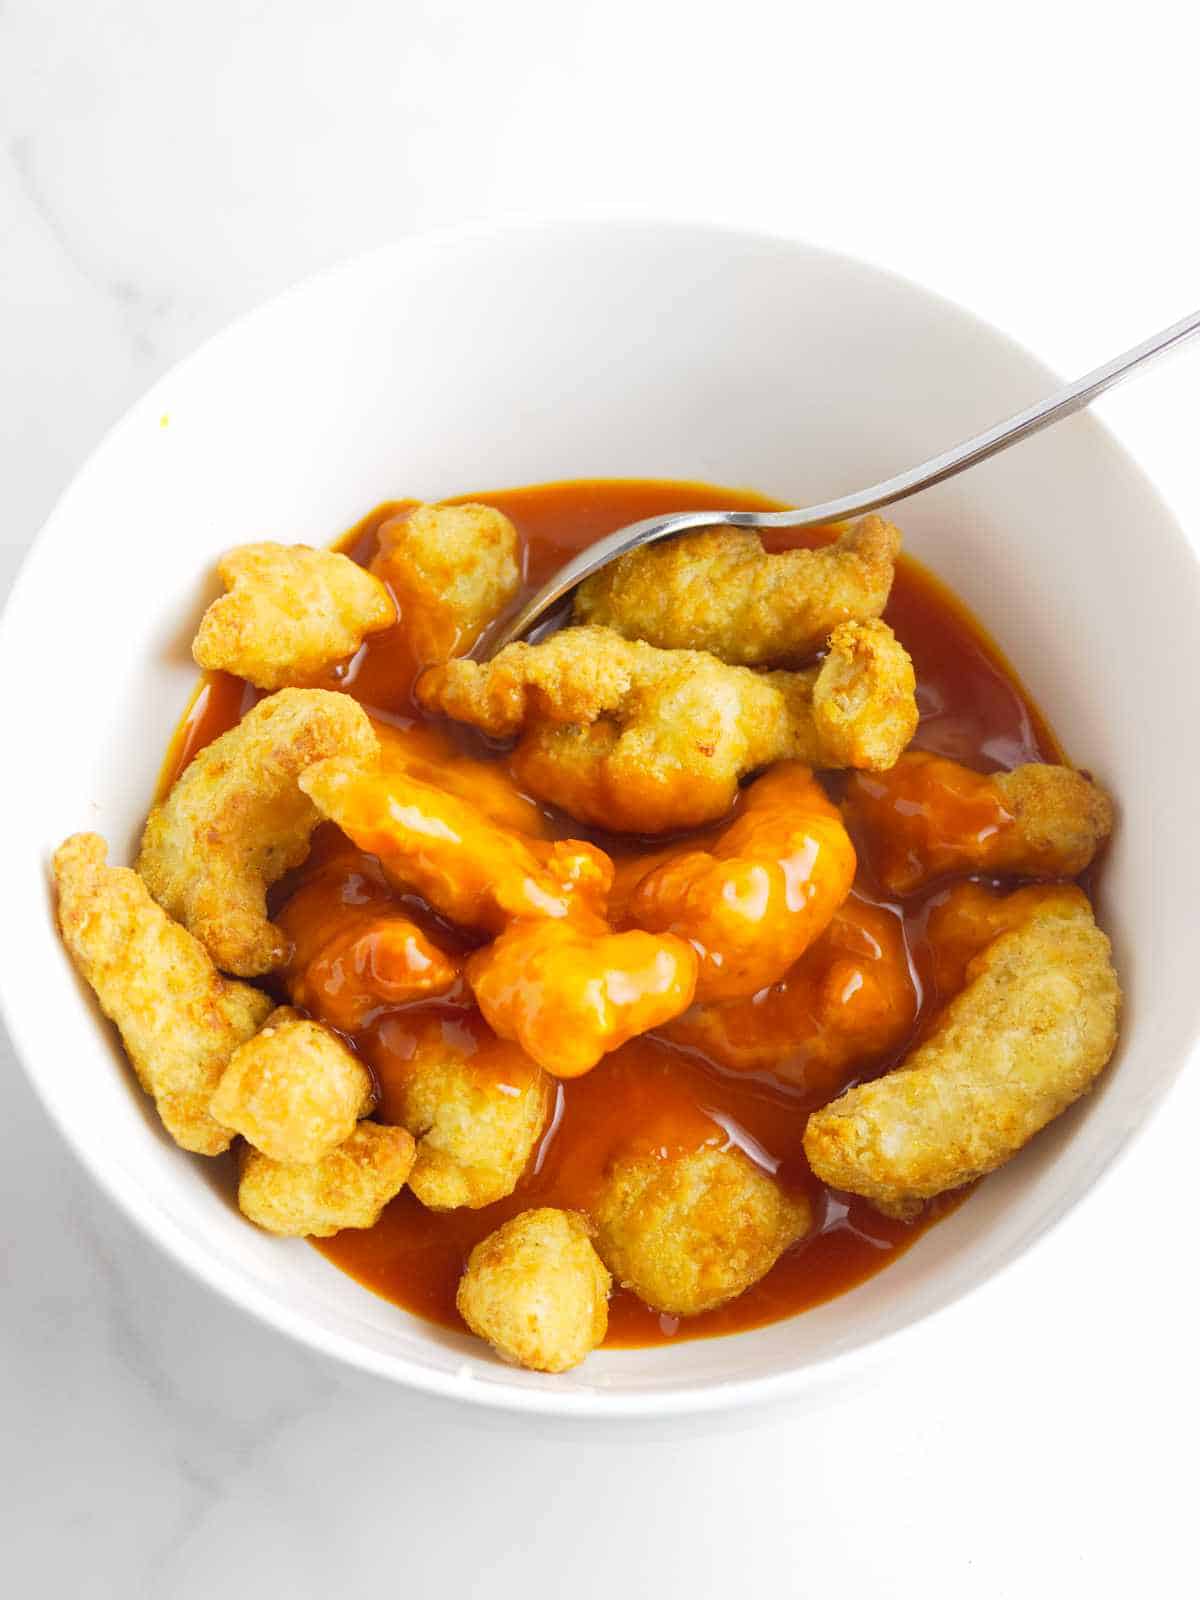 crispy tempura nuggets in a bowl with sauce, being tossed.